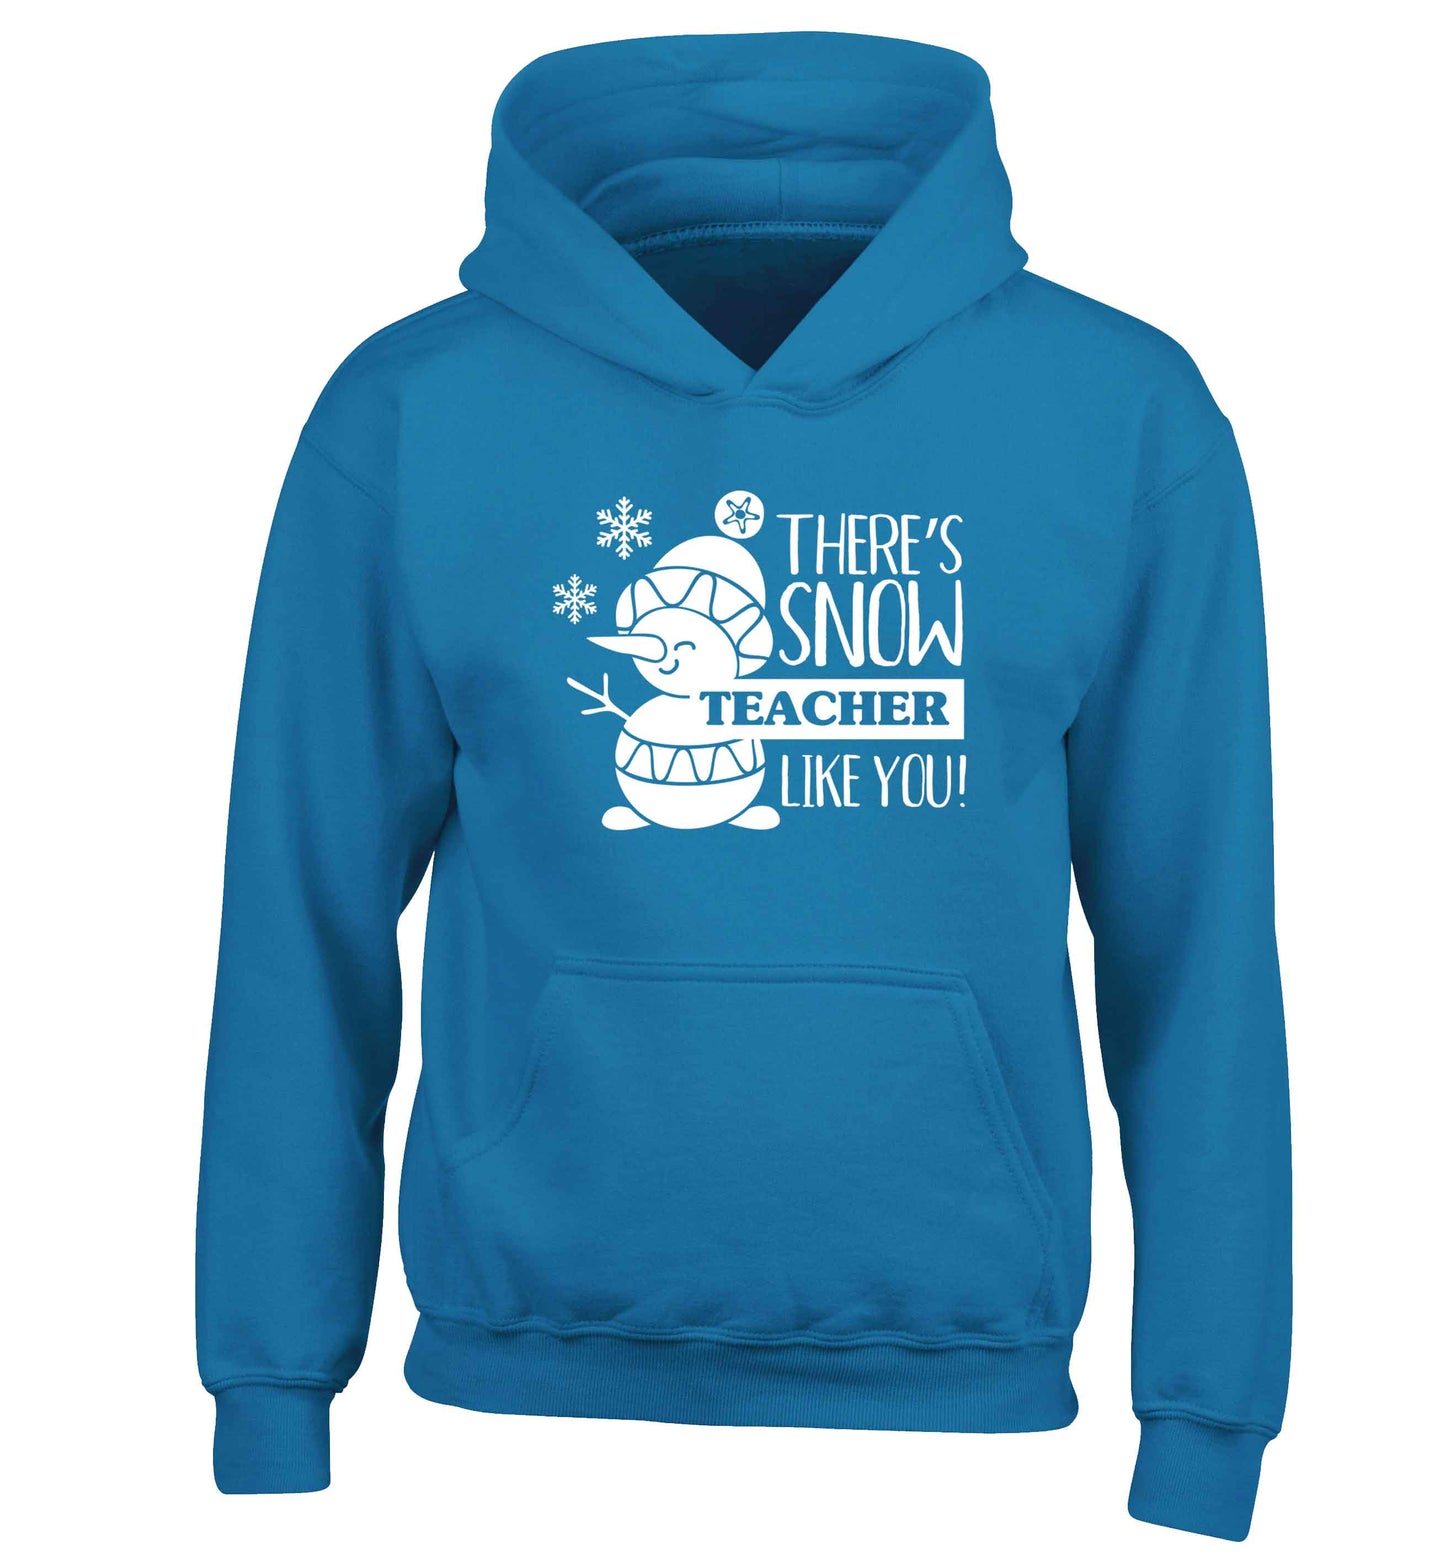 There's snow teacher like you children's blue hoodie 12-13 Years